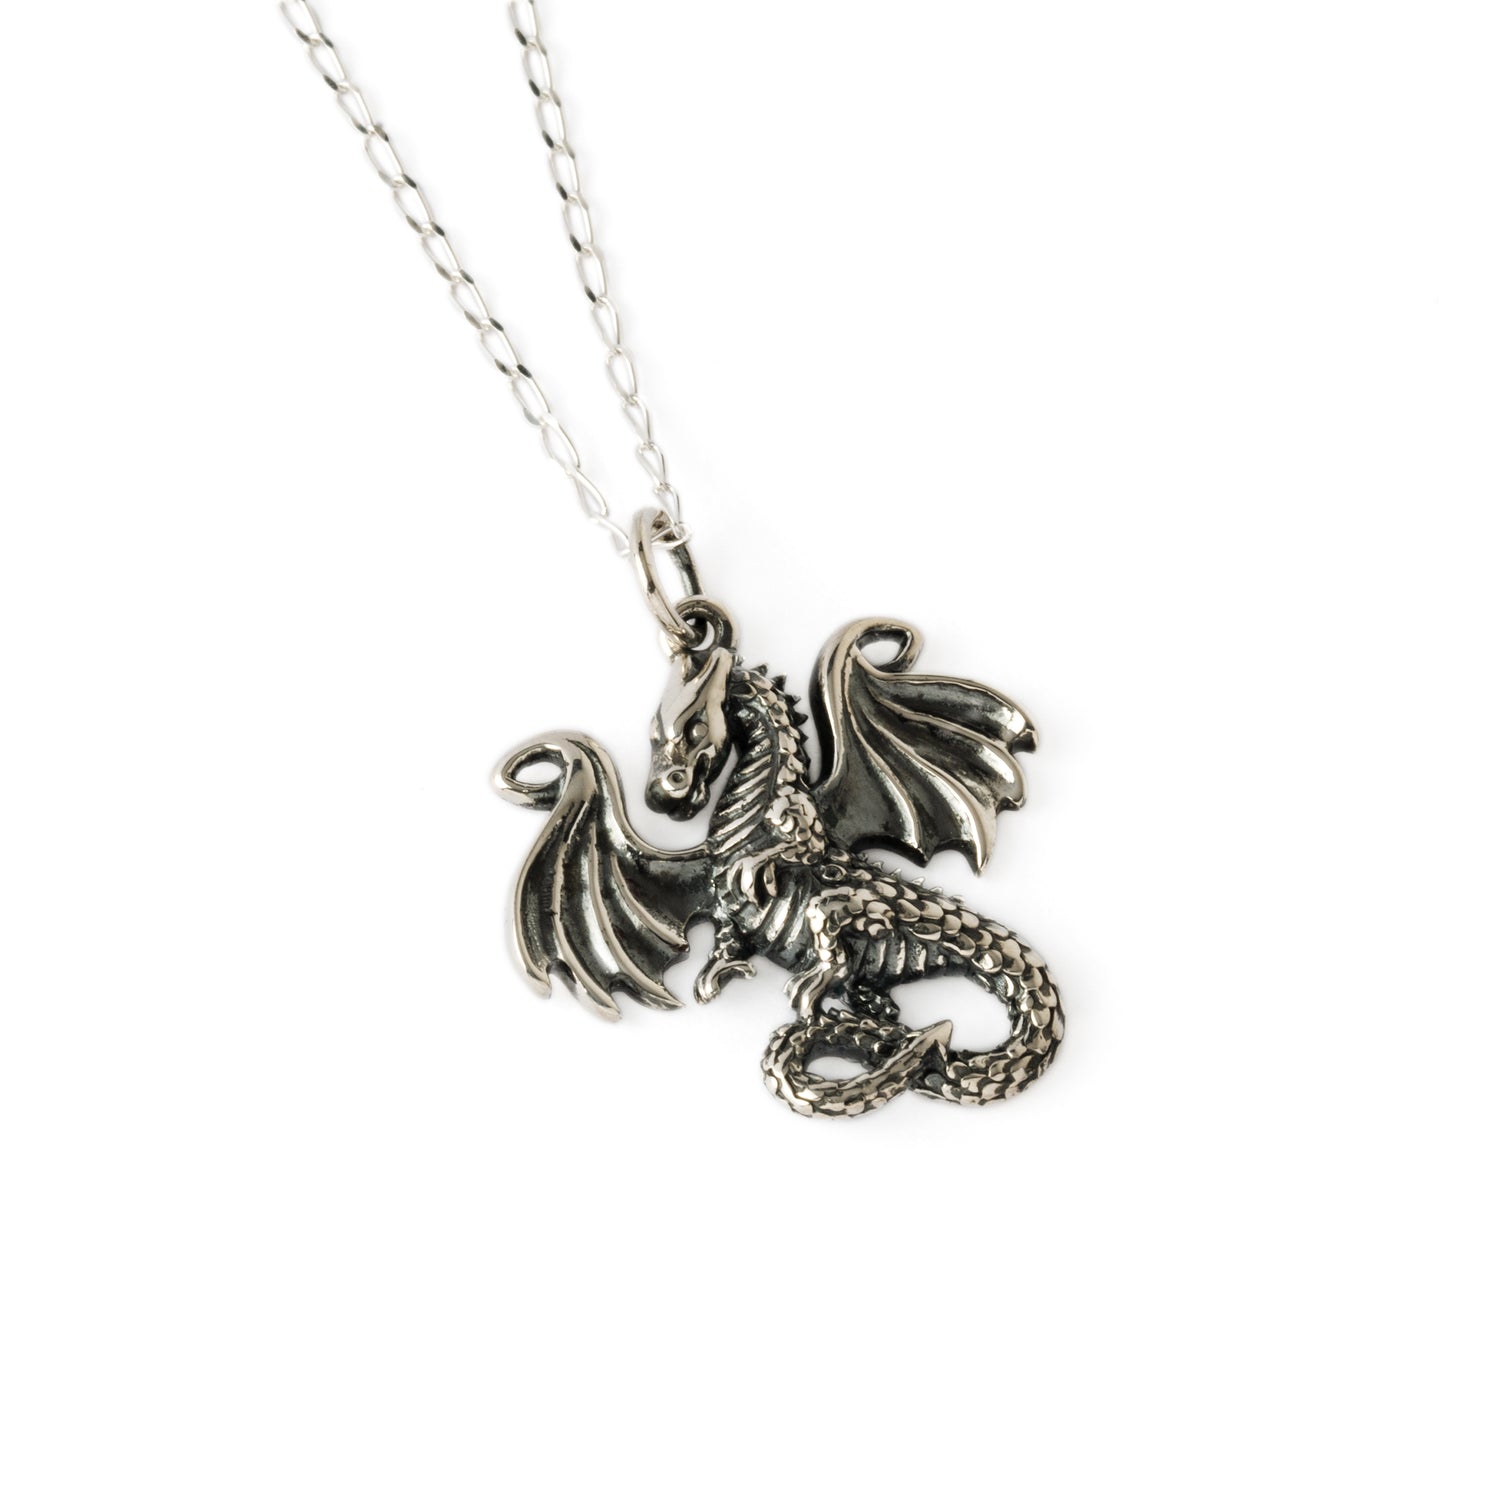 Dragon tale silver charm necklace right side view